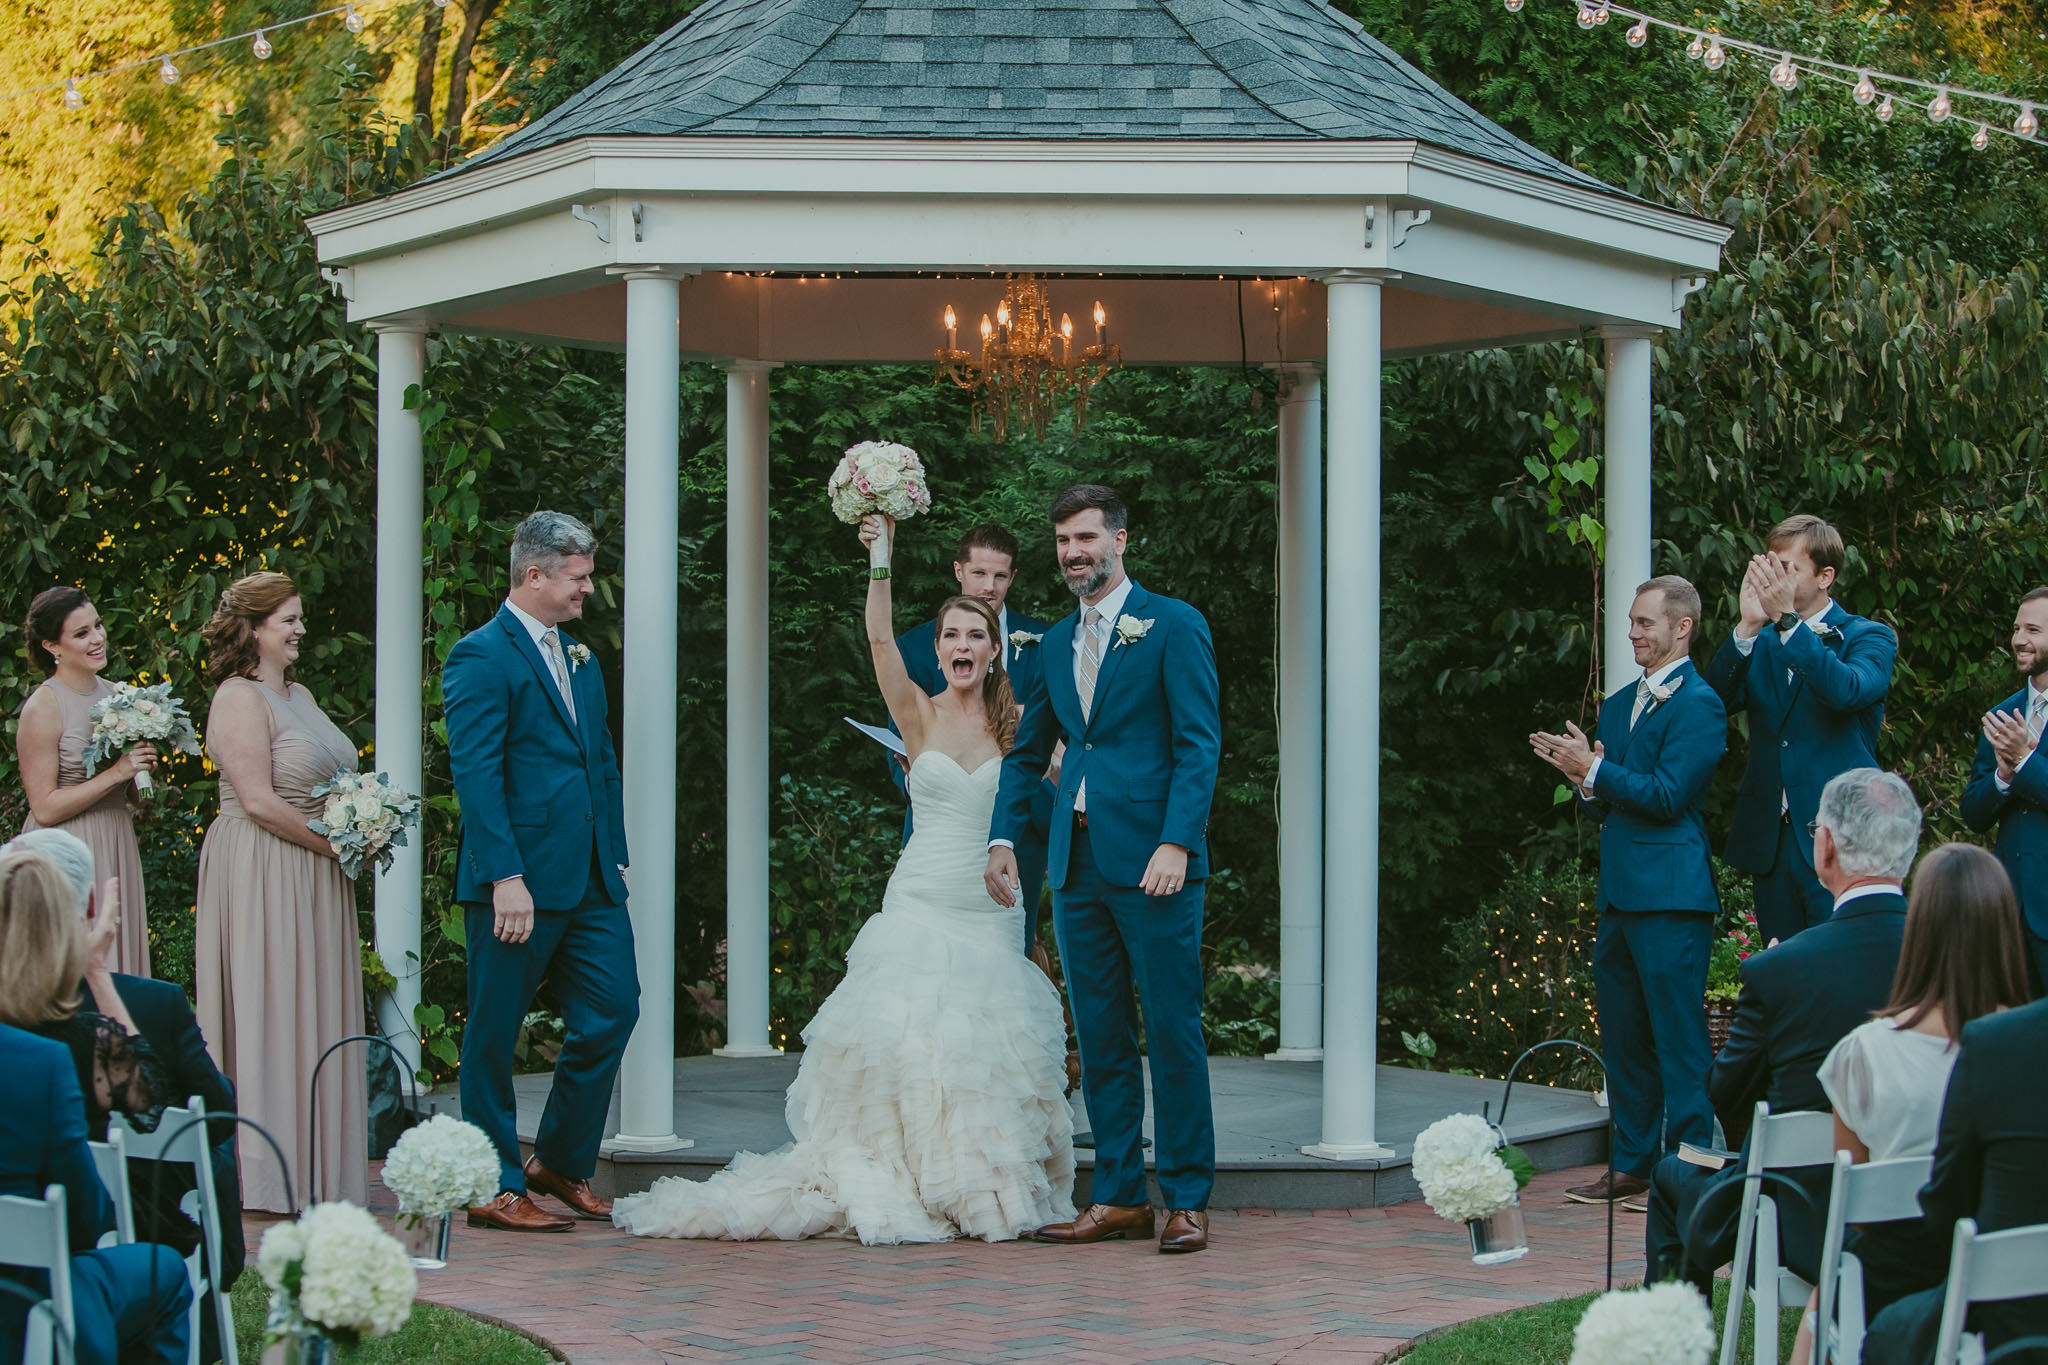 Wedding ceremony at Alexander Homestead in Charlotte, NC